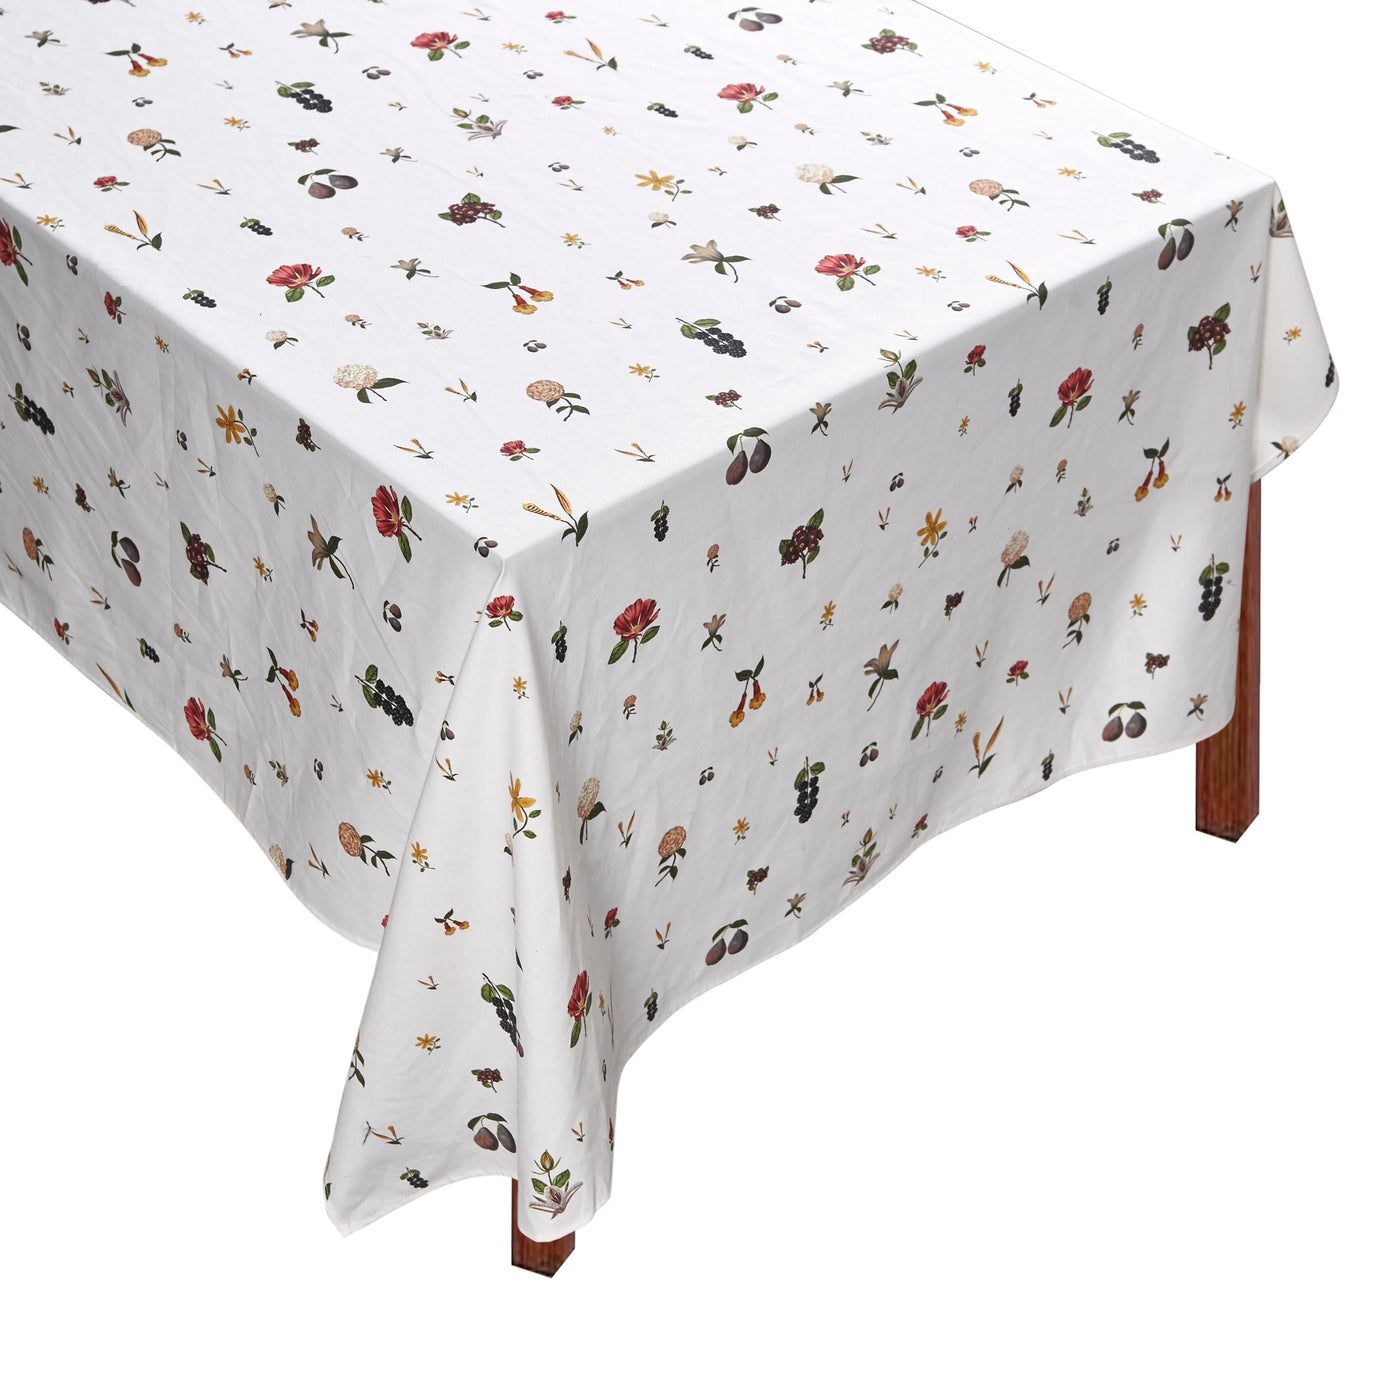 Dotted Floral Tablecloth Chintz Chefanie 